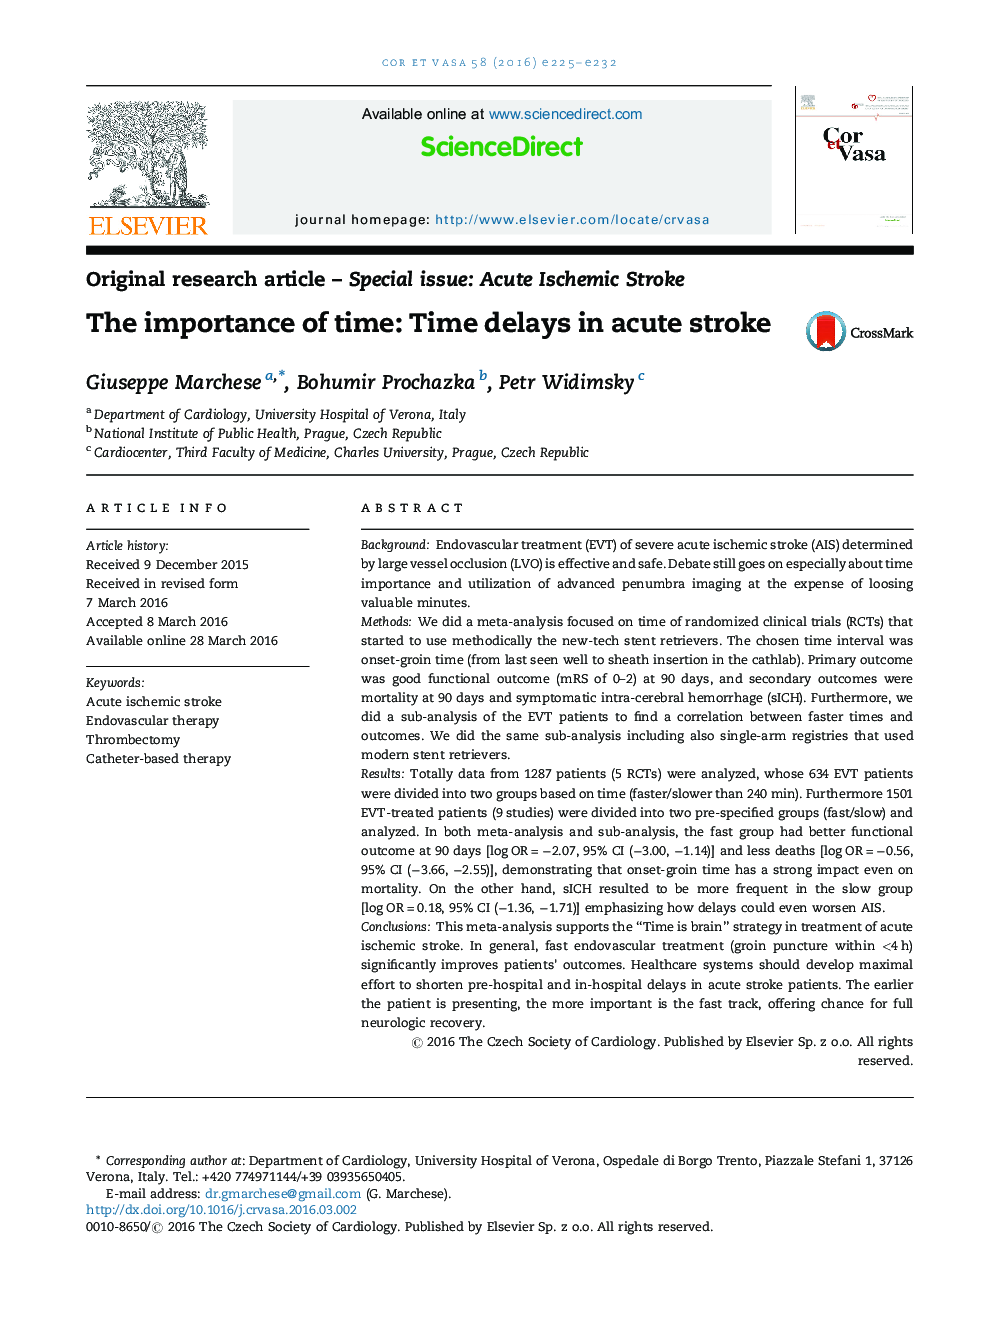 The importance of time: Time delays in acute stroke